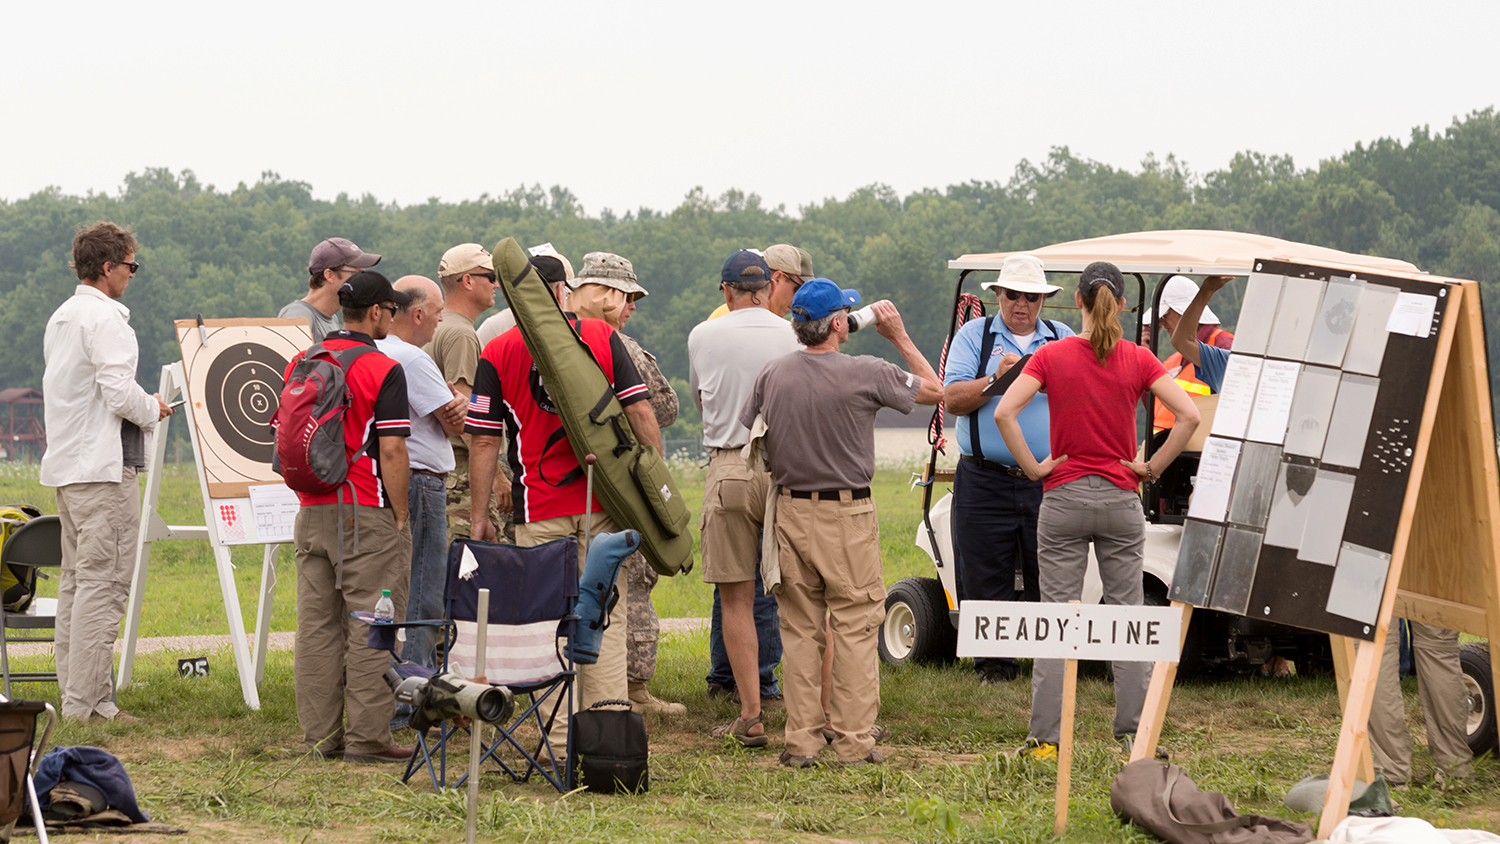 Shootoff briefing during day two at the NRA High Power Rifle Long Championships